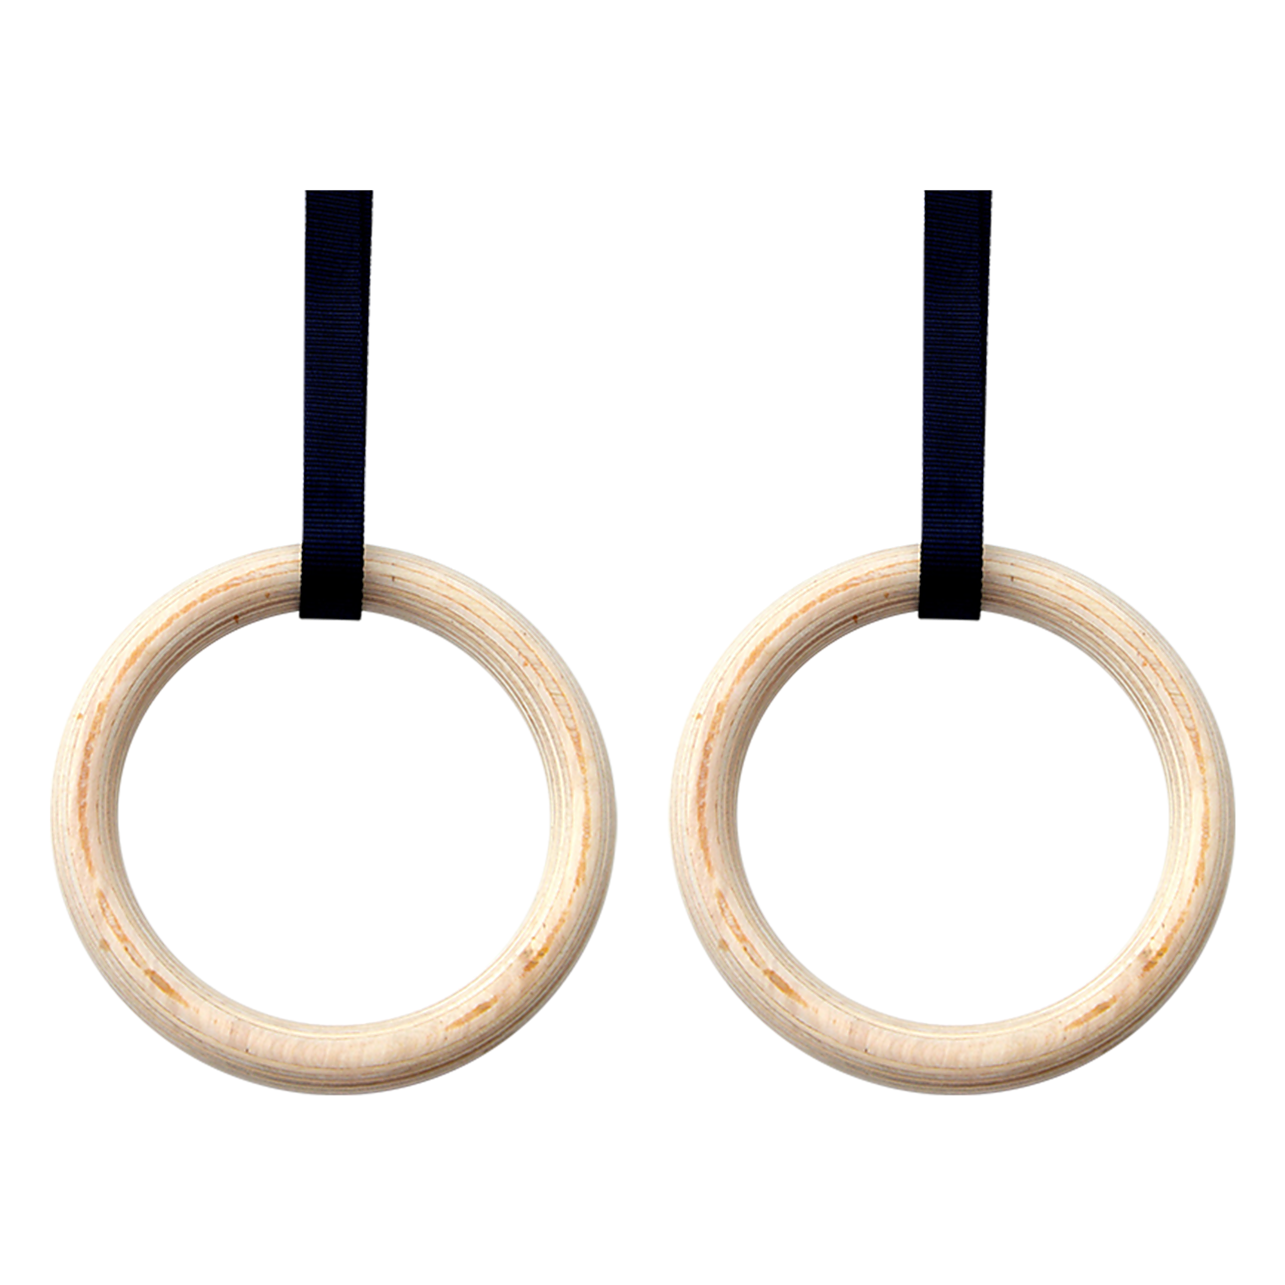 32mm Wooden Gymnastics Rings Olympic Gymnastic Rings